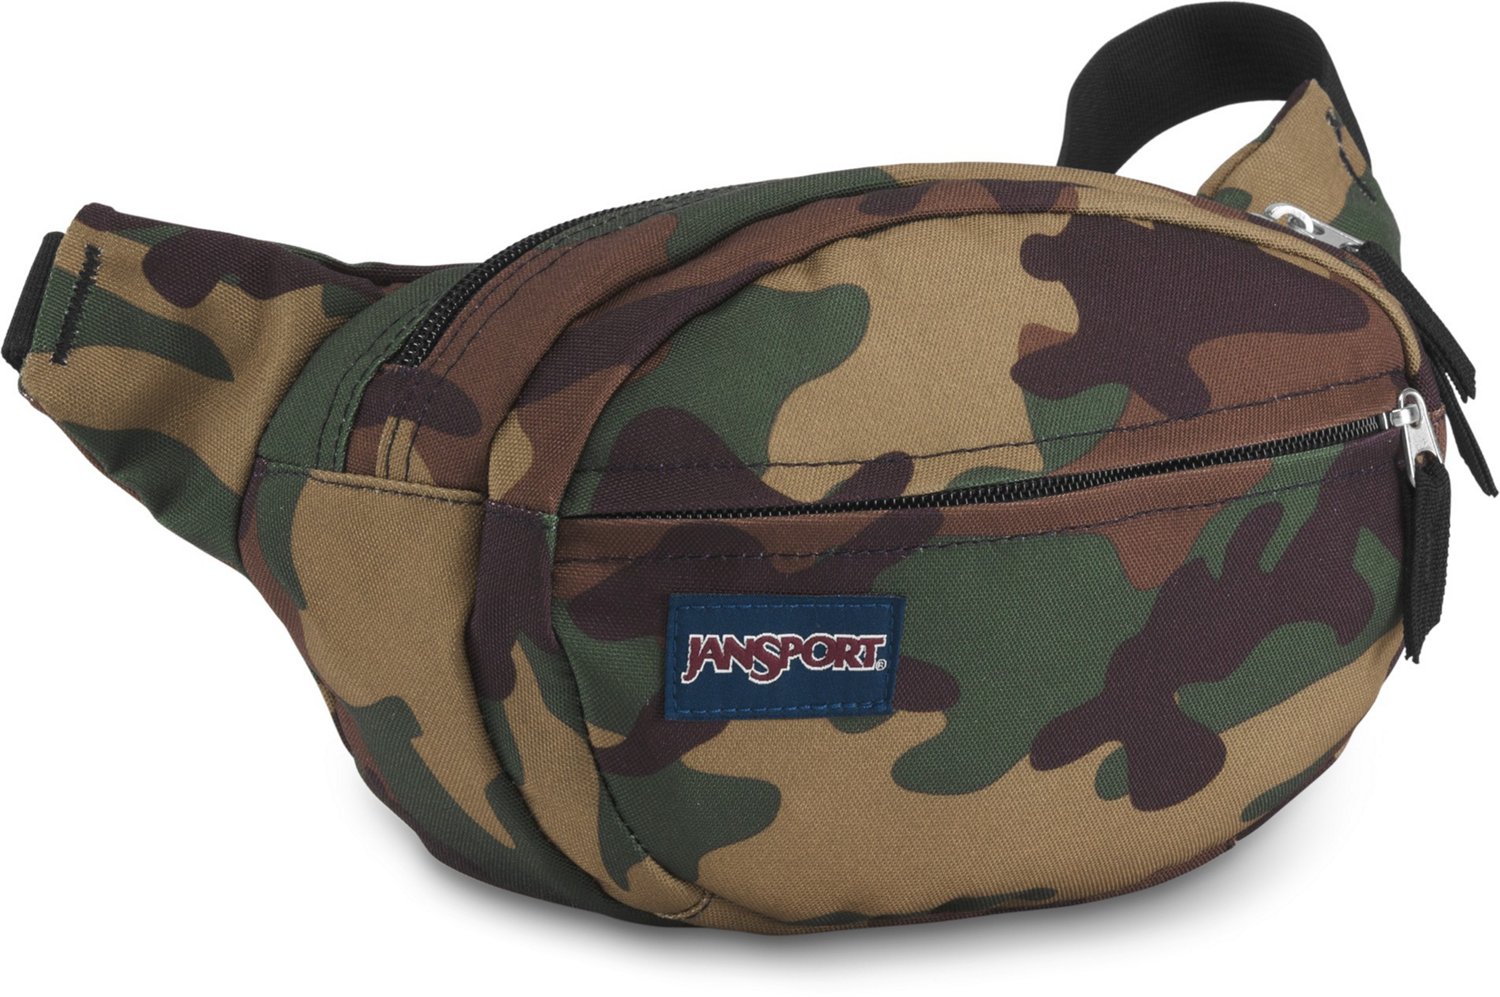 JanSport Classic Fifth Ave Camo Fanny Pack | Academy